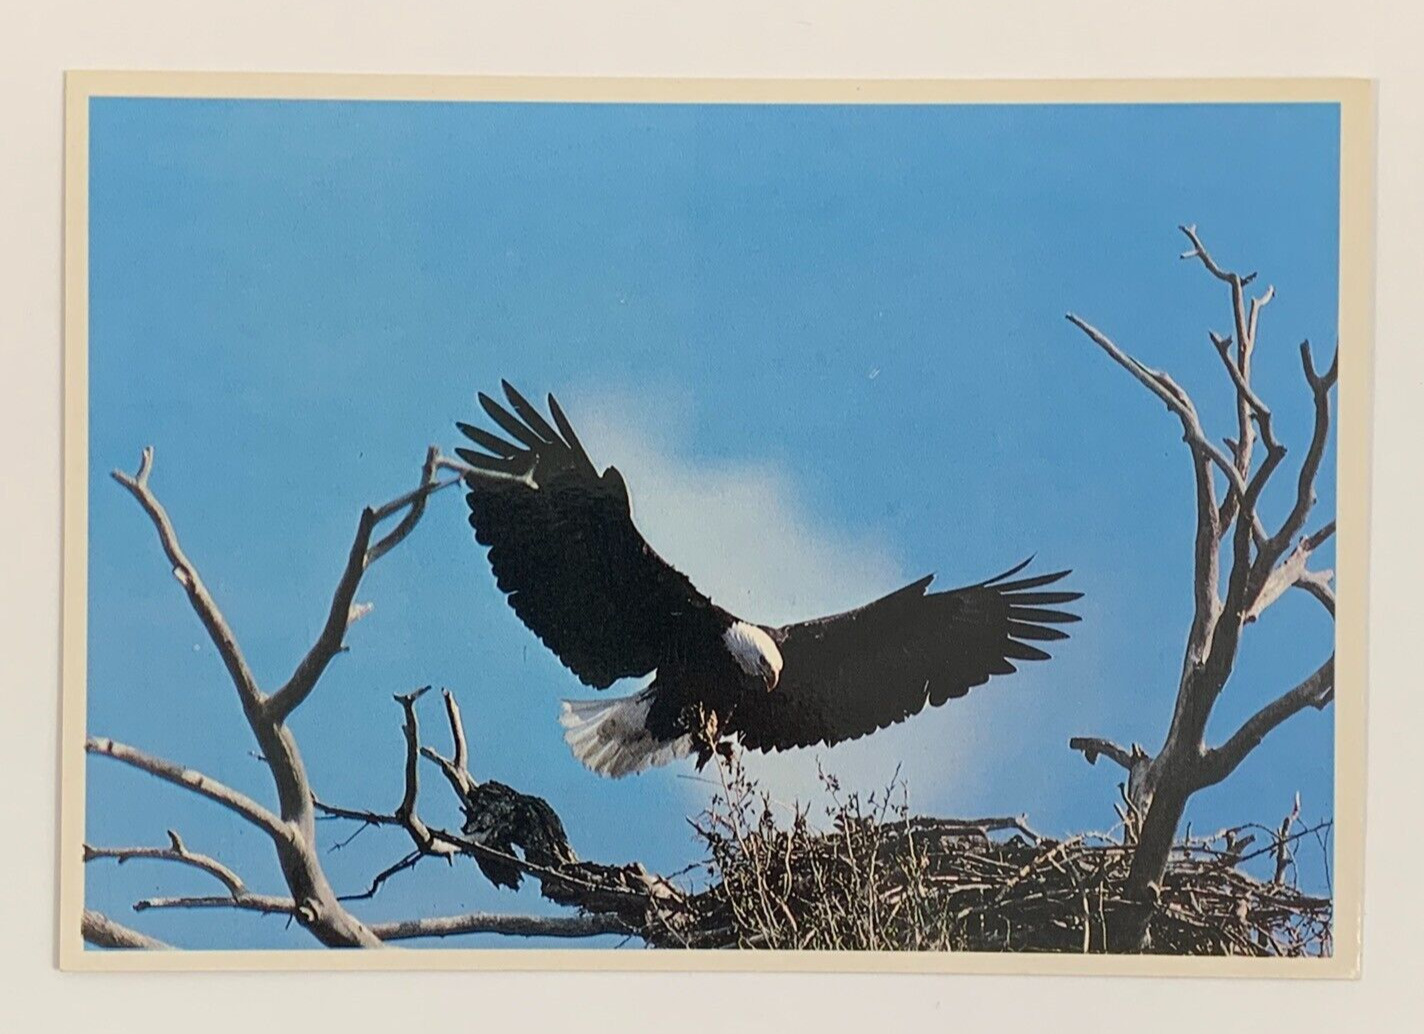 A Magnificent American Bald Eagle returns to its Nest with Prey Postcard